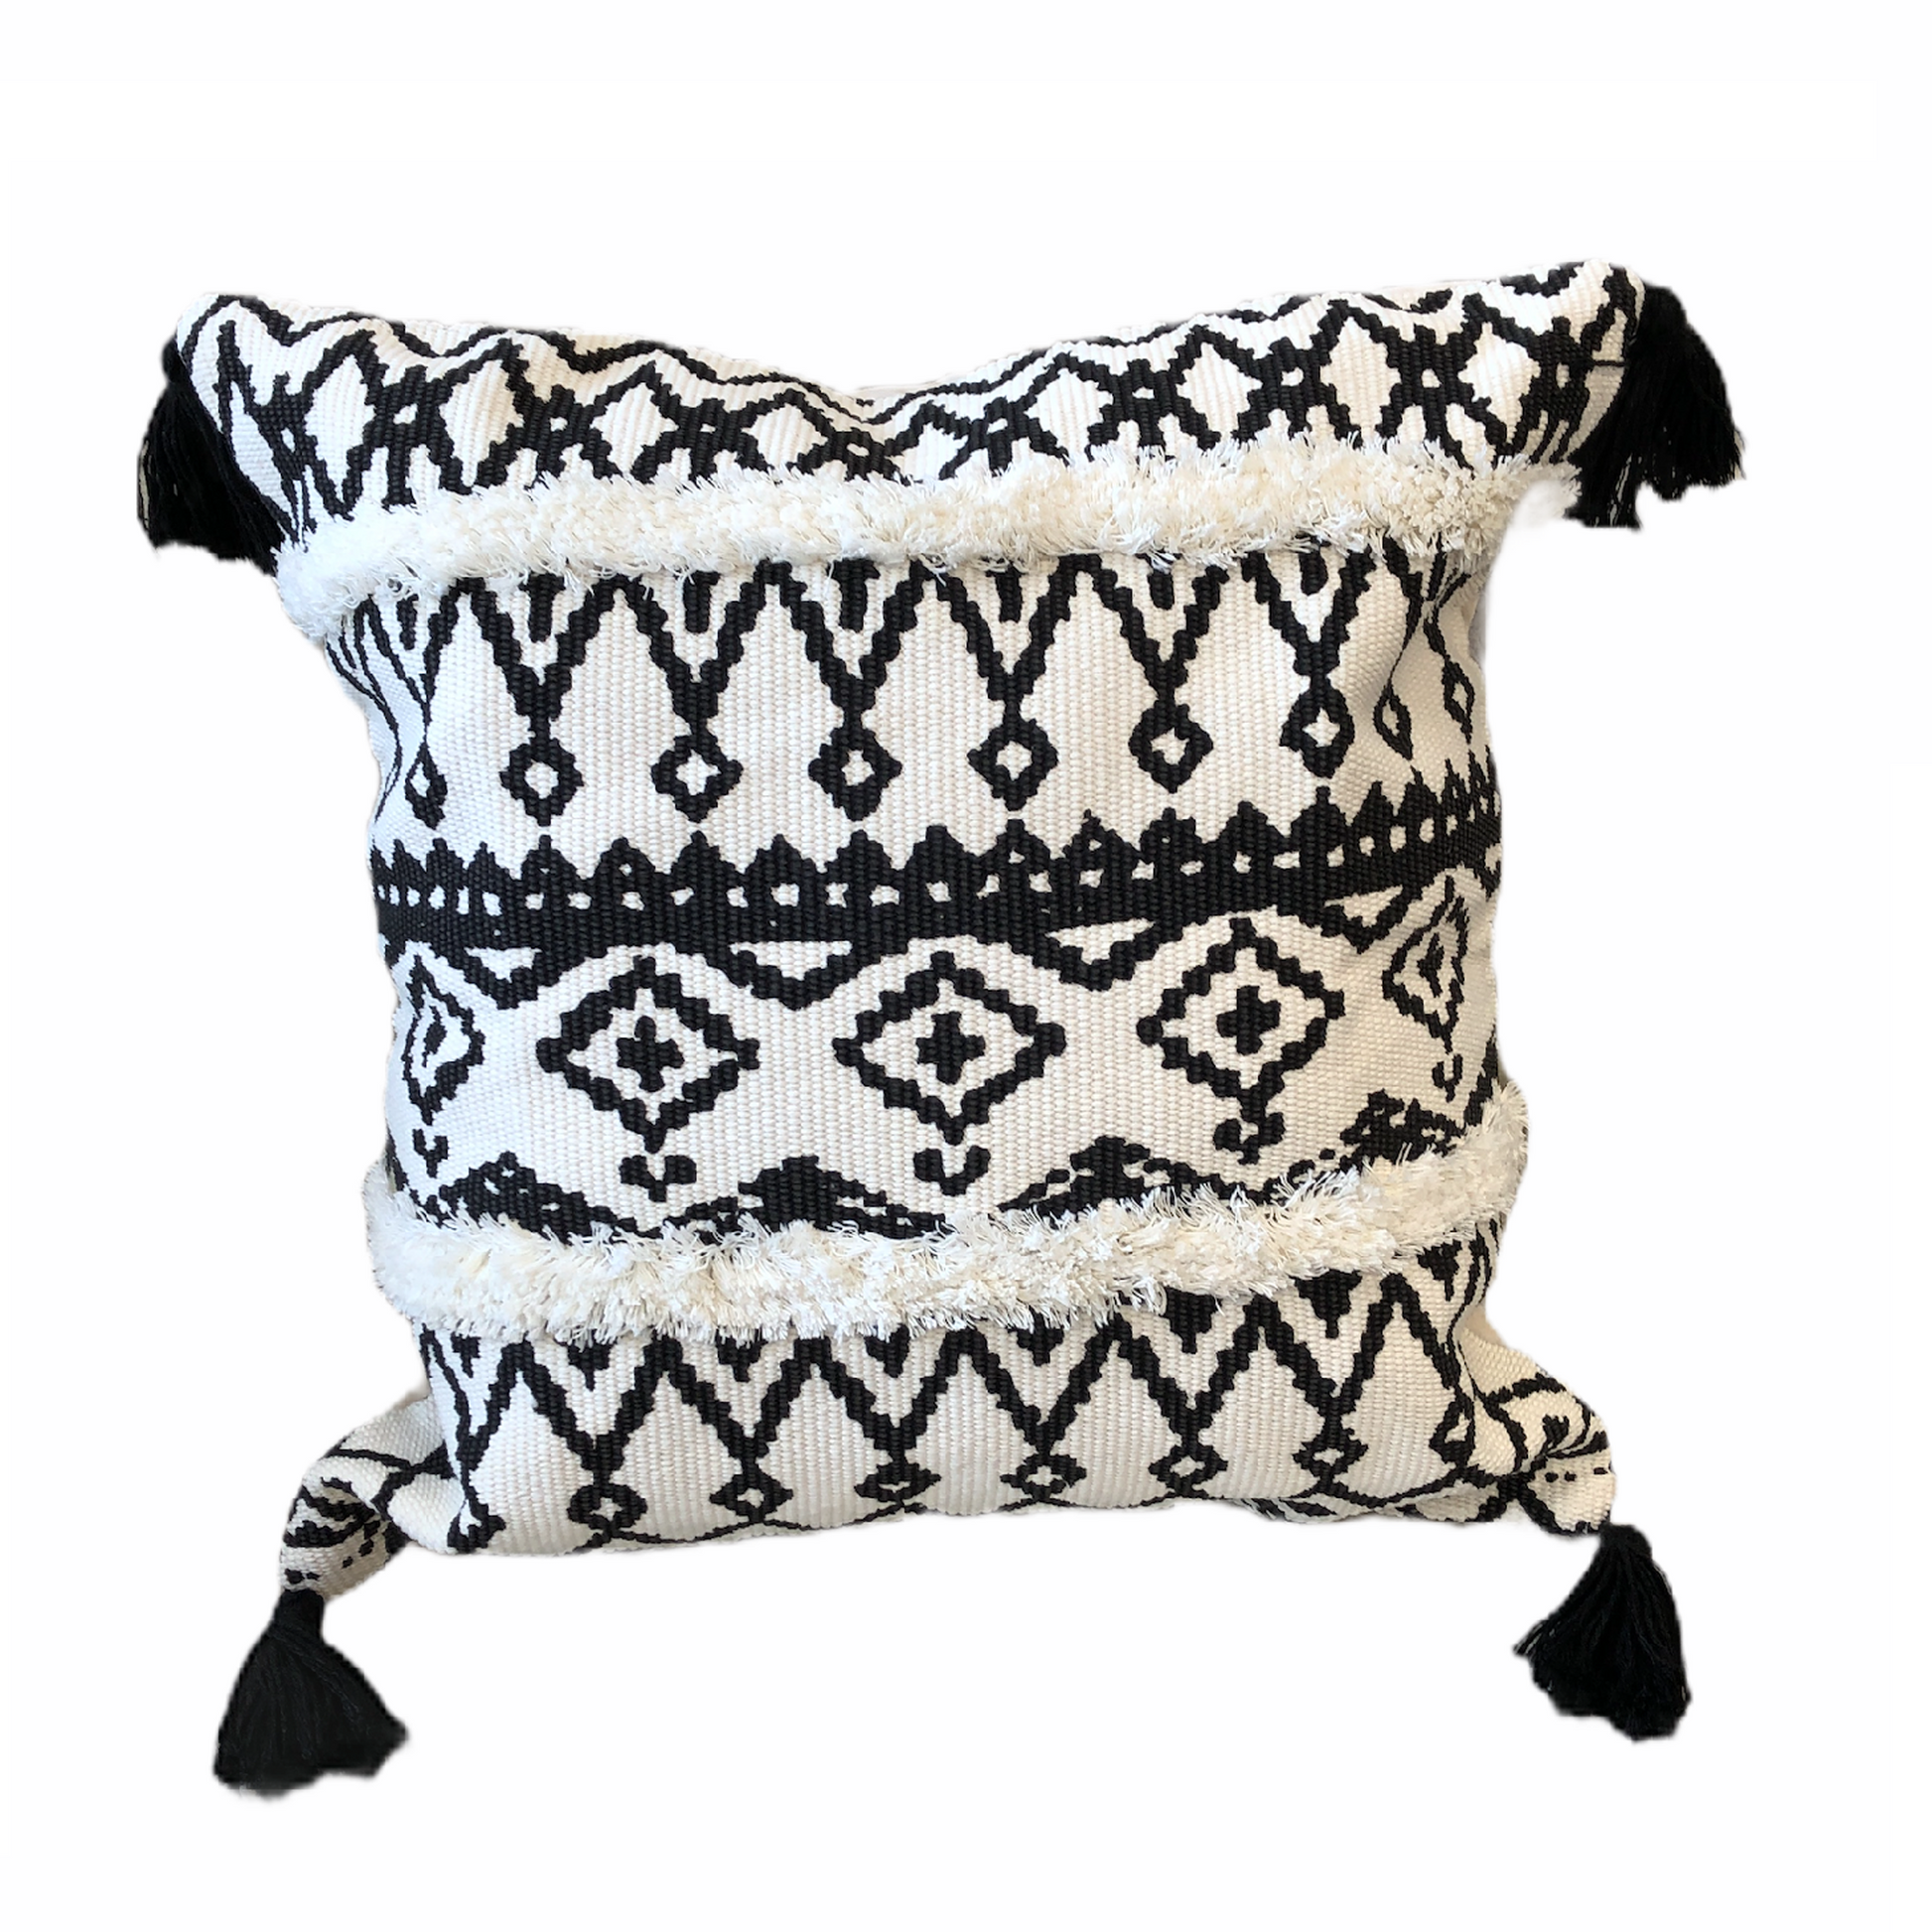 Black and White square cushion with black tassels and black pattern 